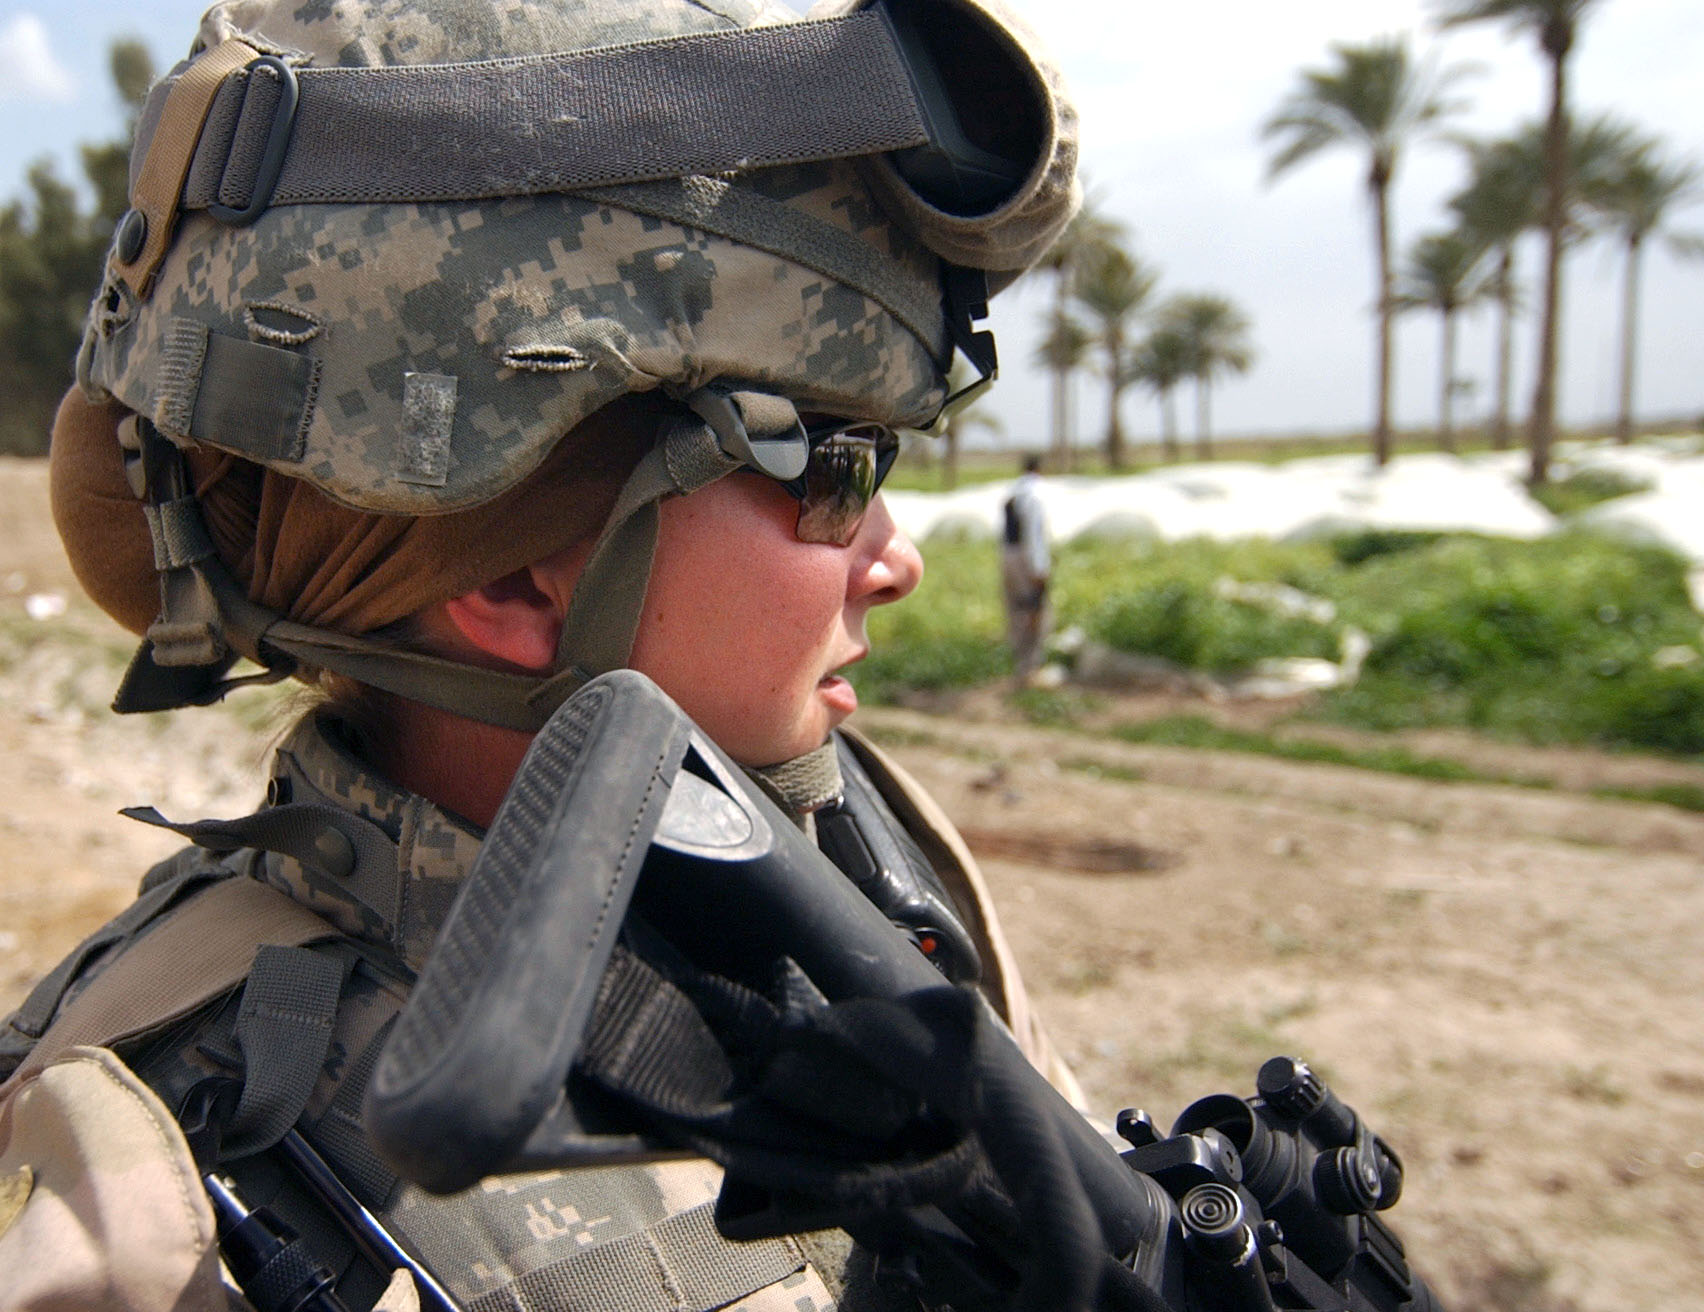 U.S. Army Sgt. Ashley Hort keeps her weapon at the ready as she provides security for her fellow soldiers during a raid in Al Haswah, Iraq, on March 21, 2007. US Army Photo